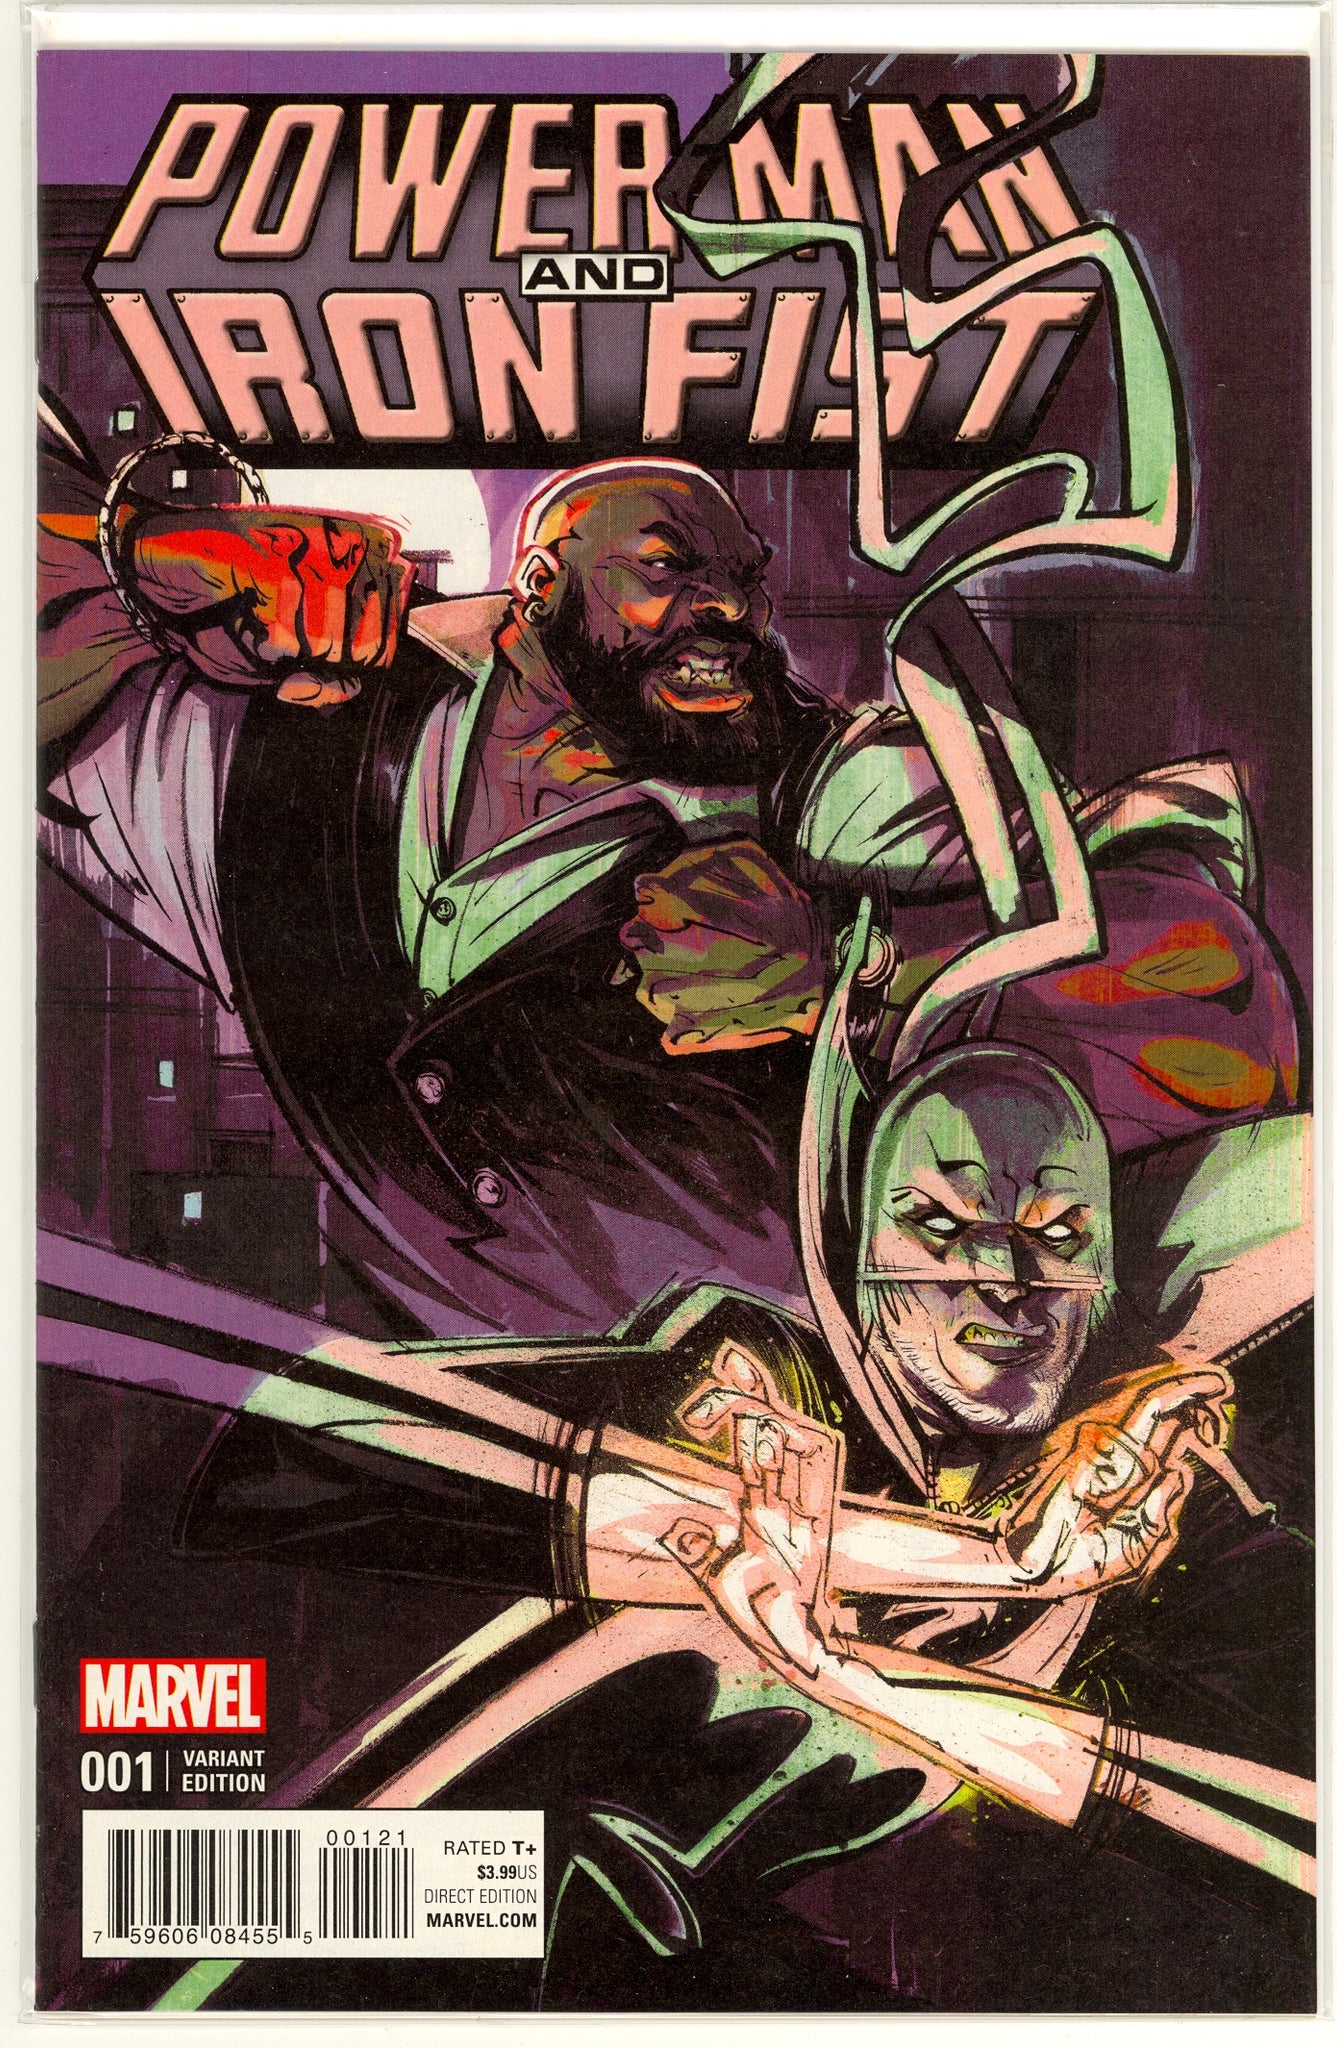 Power Man and Iron Fist #1 (2016) variant cover